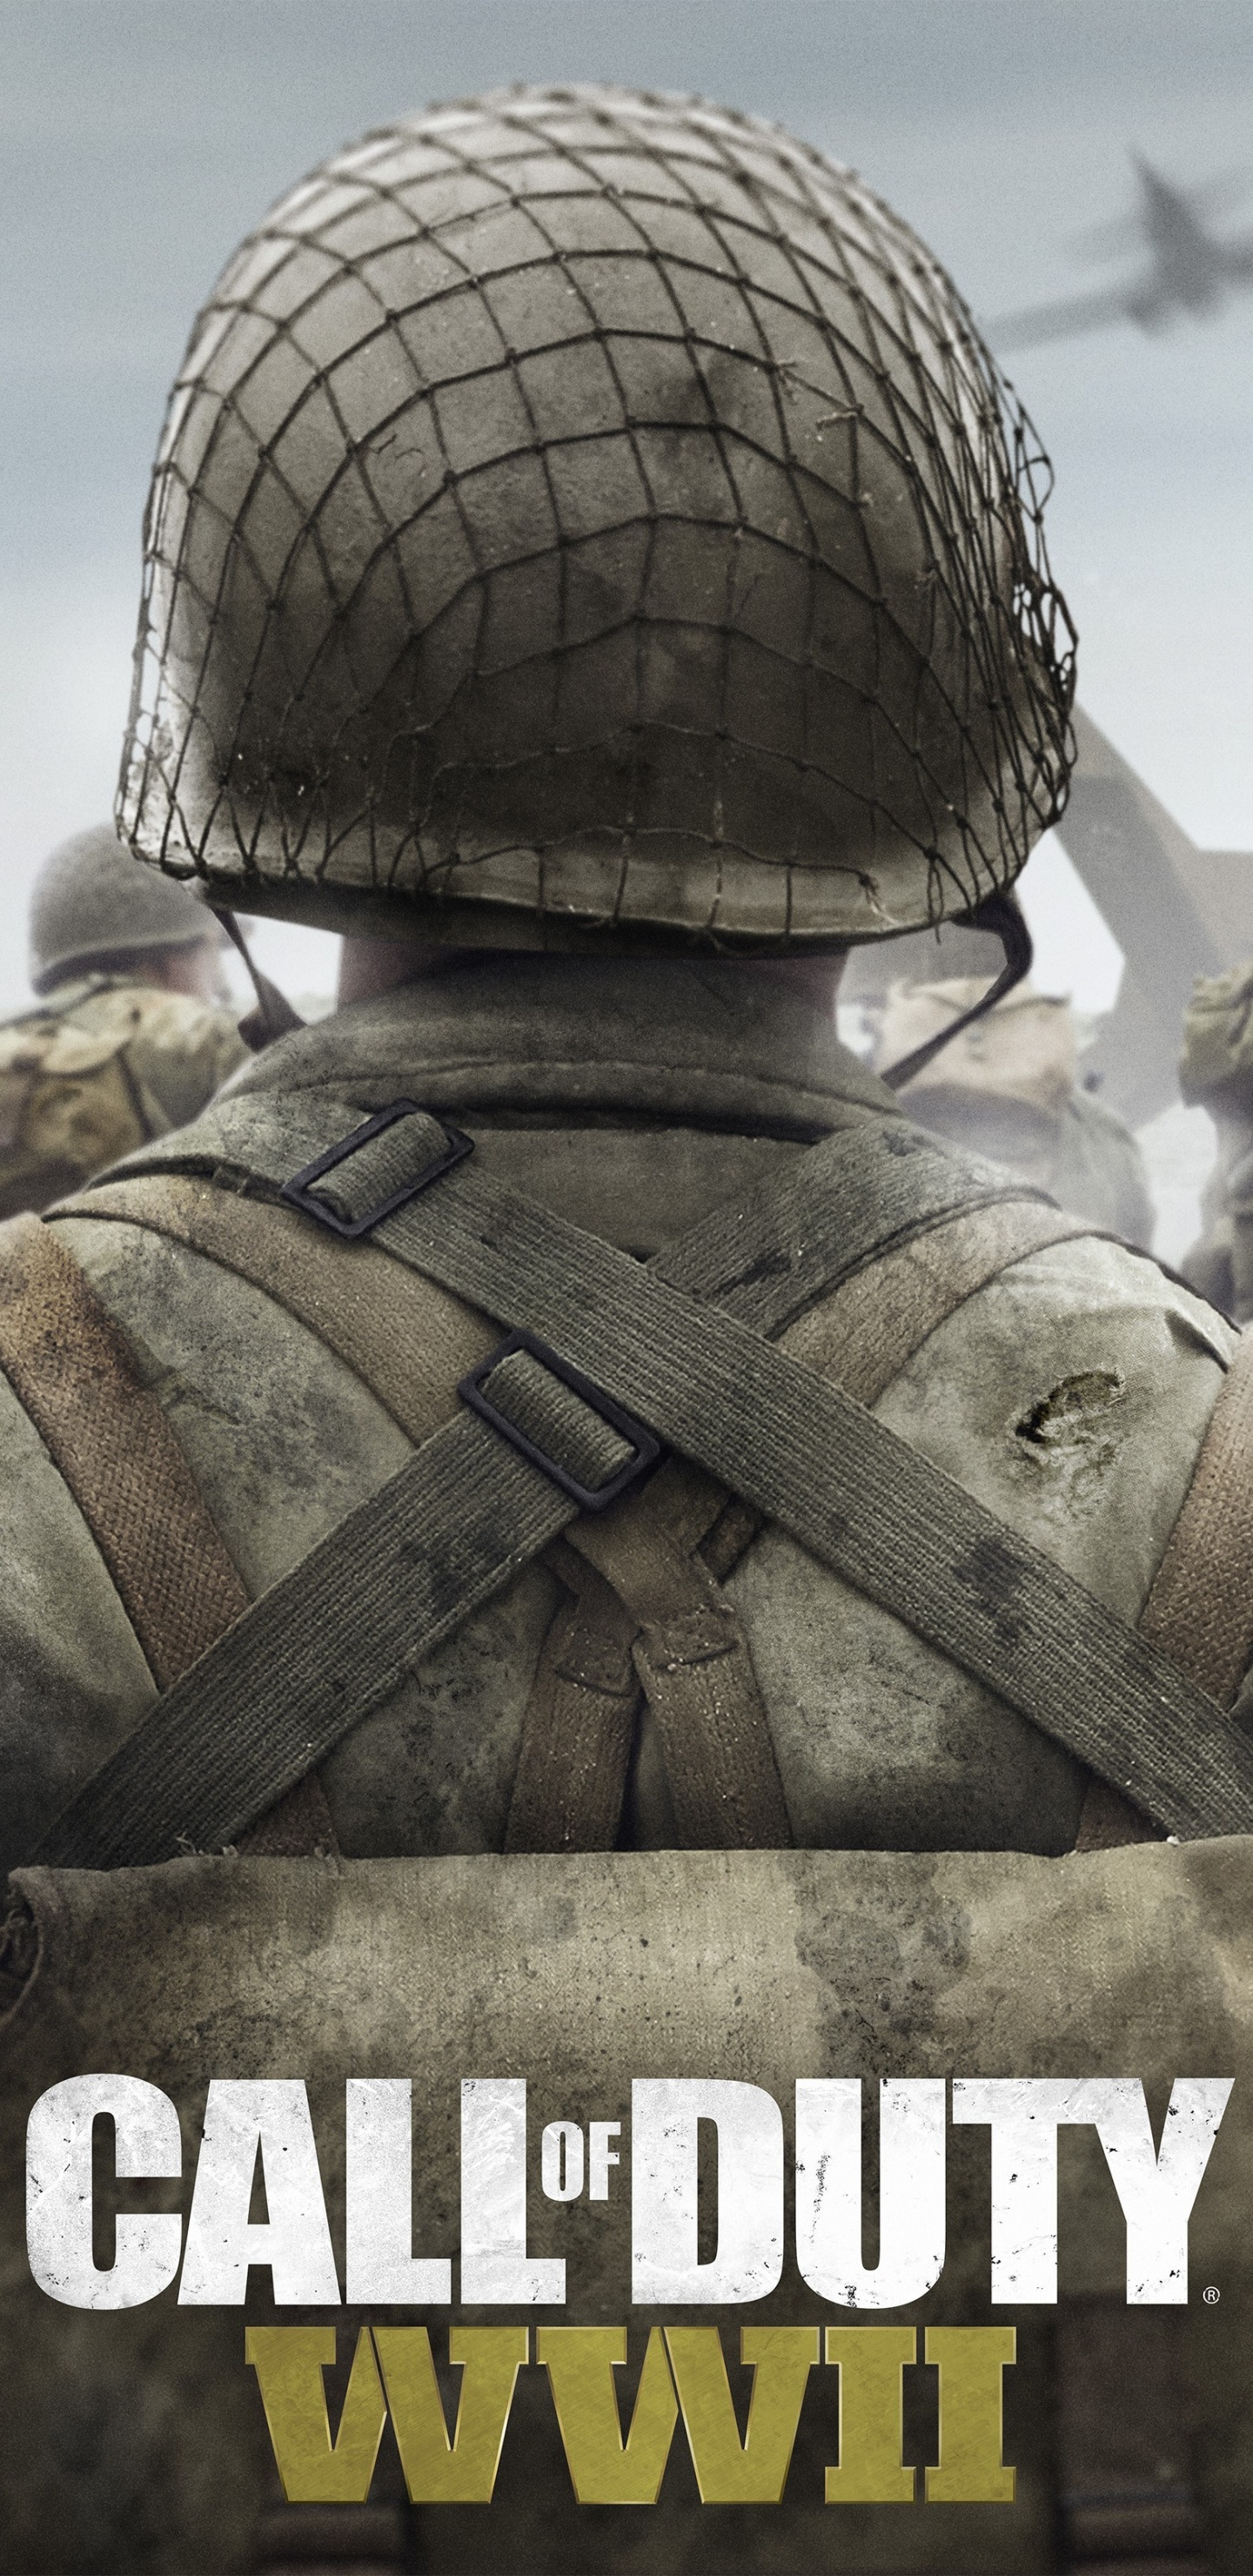 Call of Duty Ww2, Call of Duty WWII, Activision, Sledgehammer Games, Soldat. Wallpaper in 1440x2960 Resolution